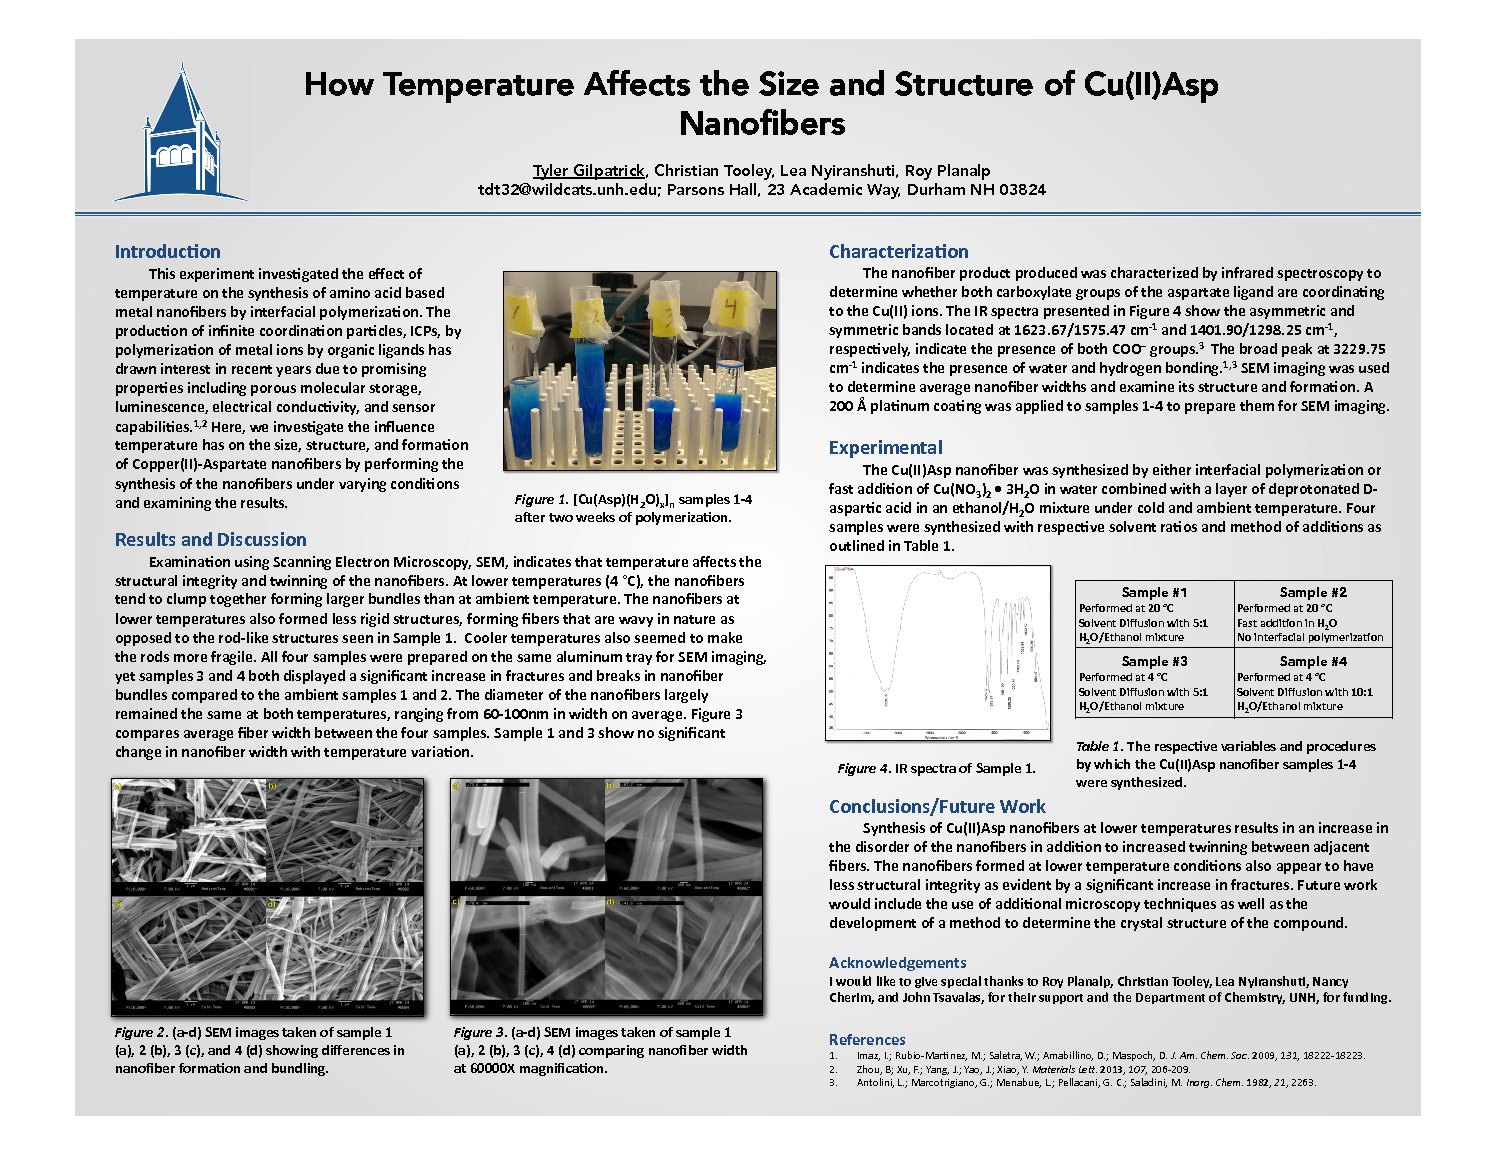 How Temperature Affects The Size And Structure Of Cu(Ii)Asp Nanofibers by tdt32